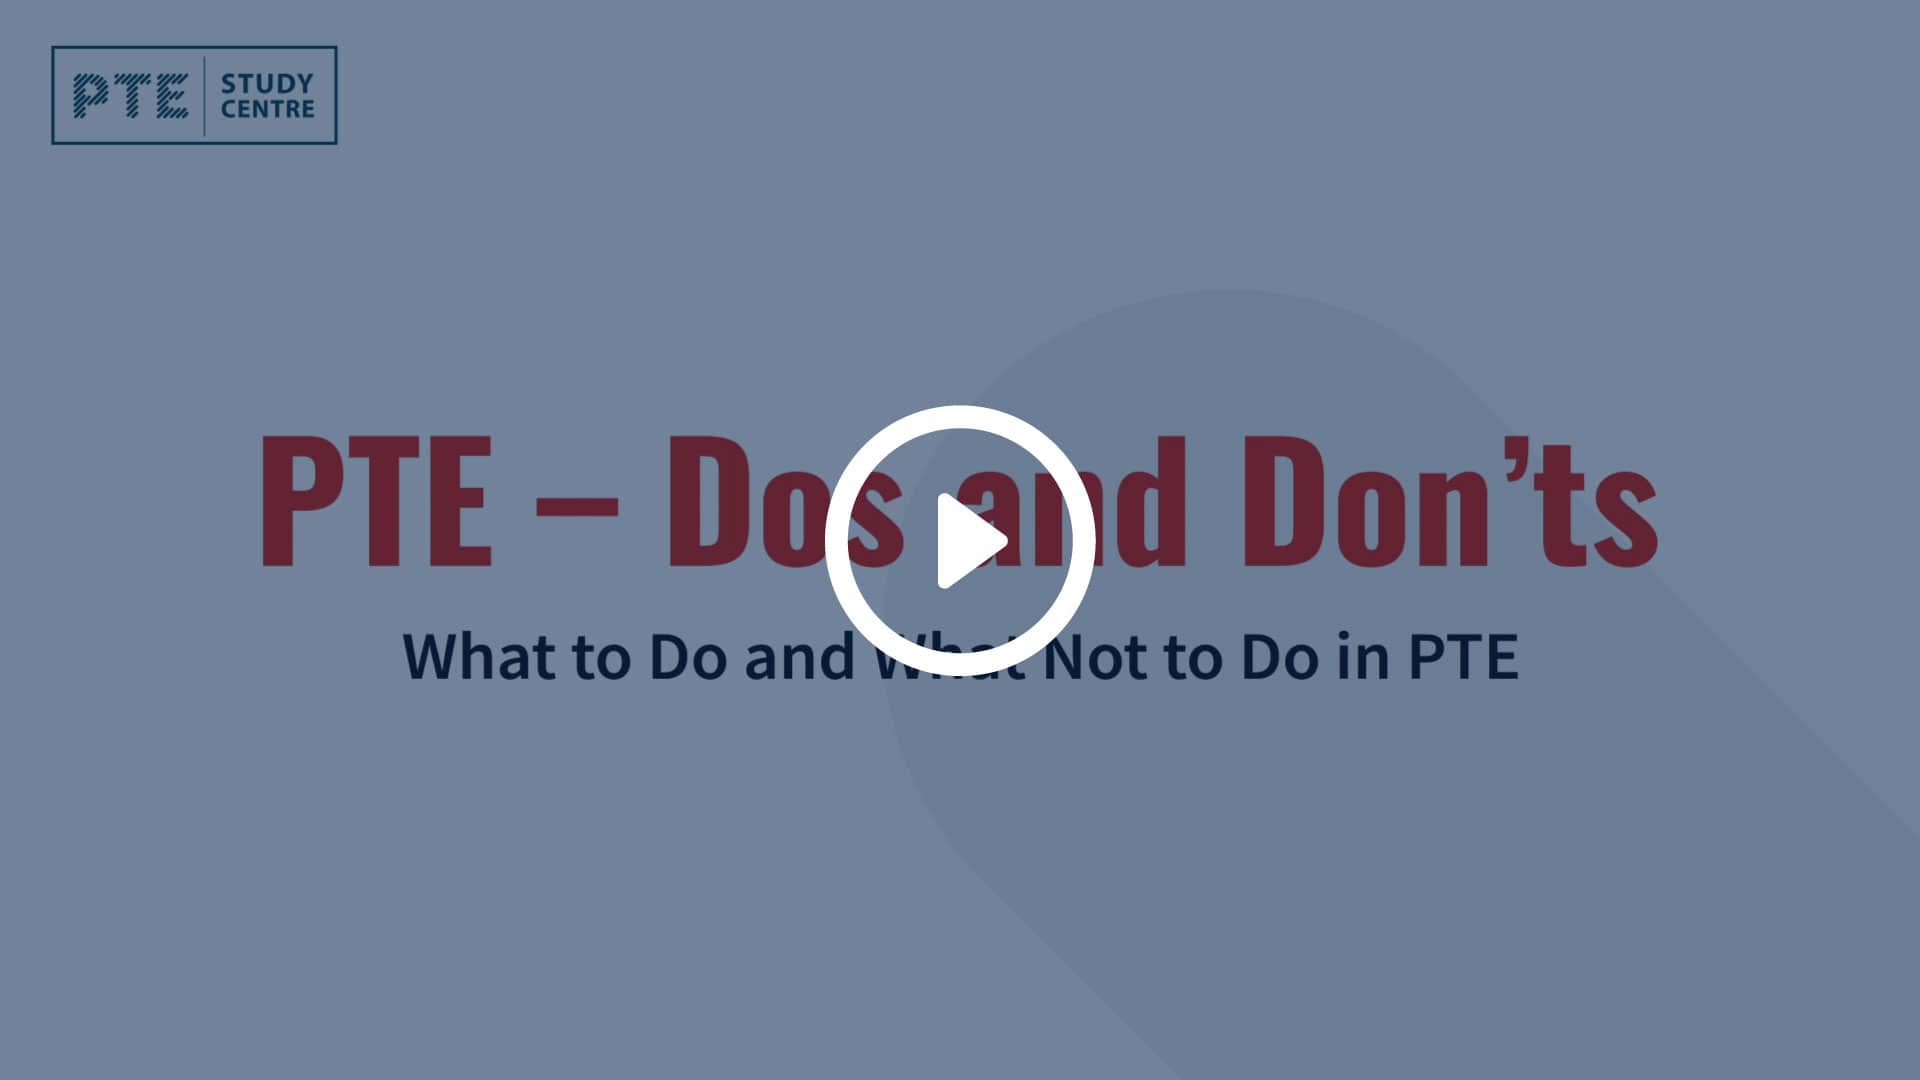 PTE Dos and Donts